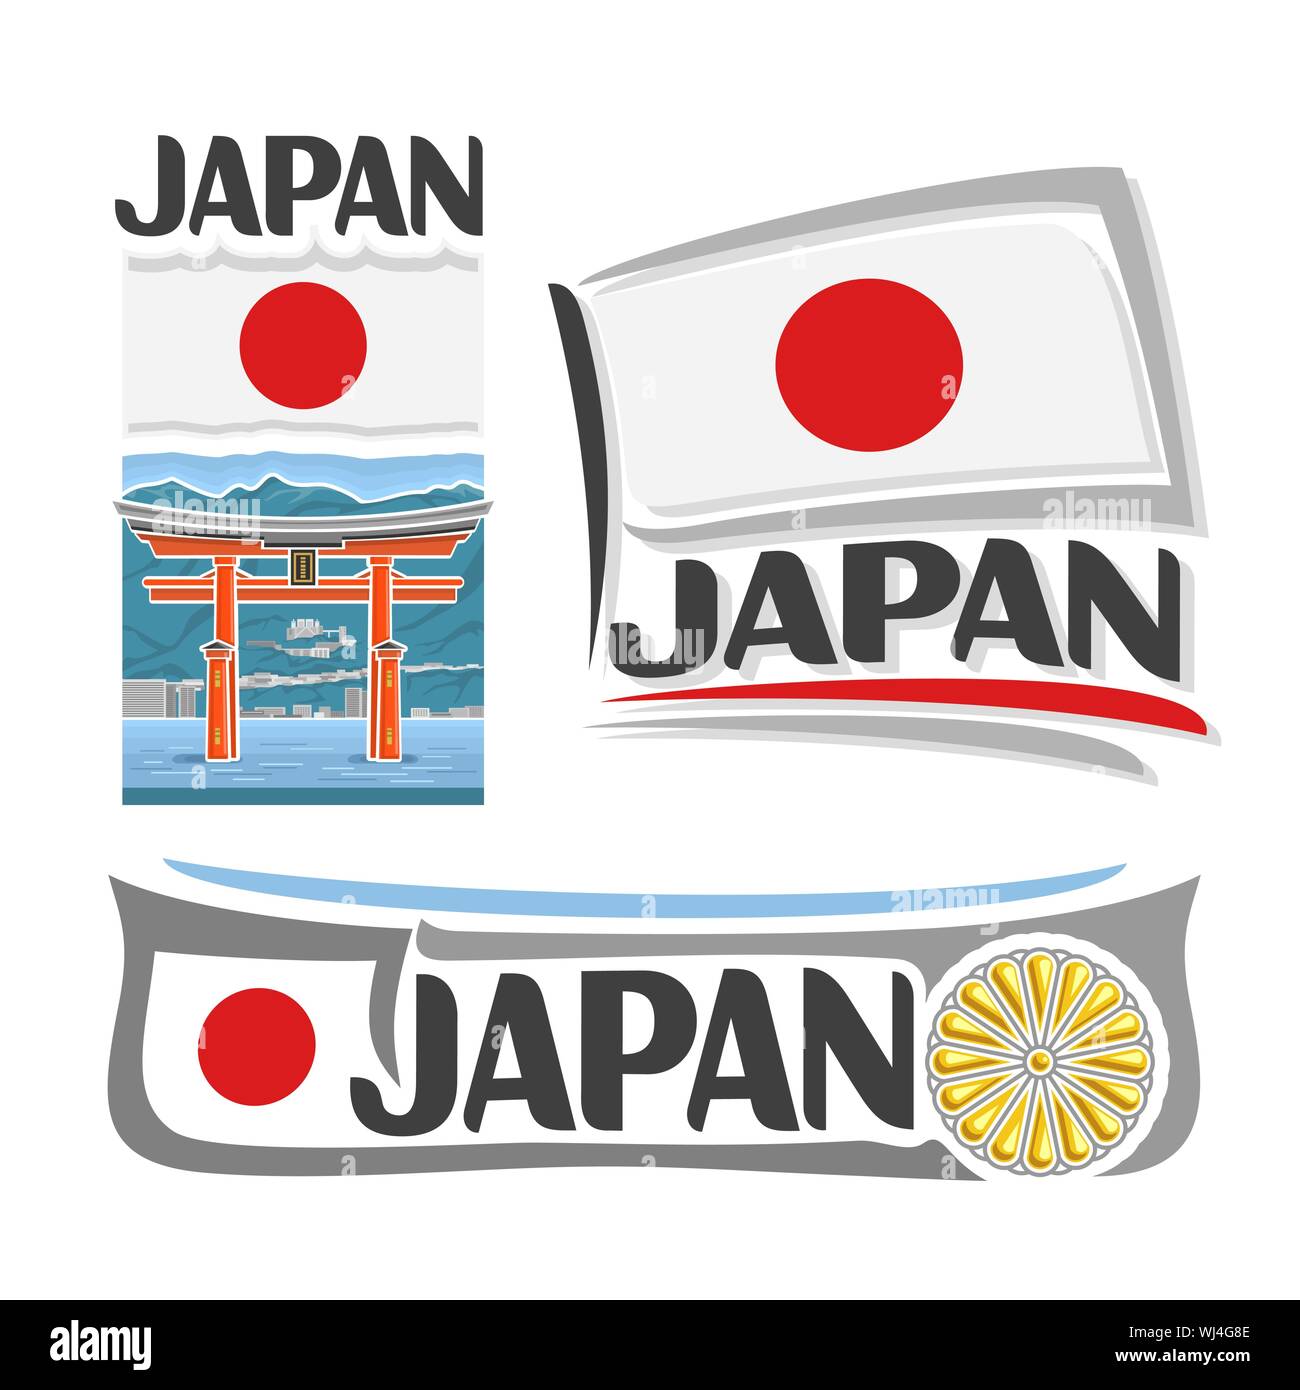 Vector logo for Japan, 3 isolated images: banner with torii gate in Miyajima on national state nipponese flag and chrysanthemum emblem - imperial seal Stock Vector